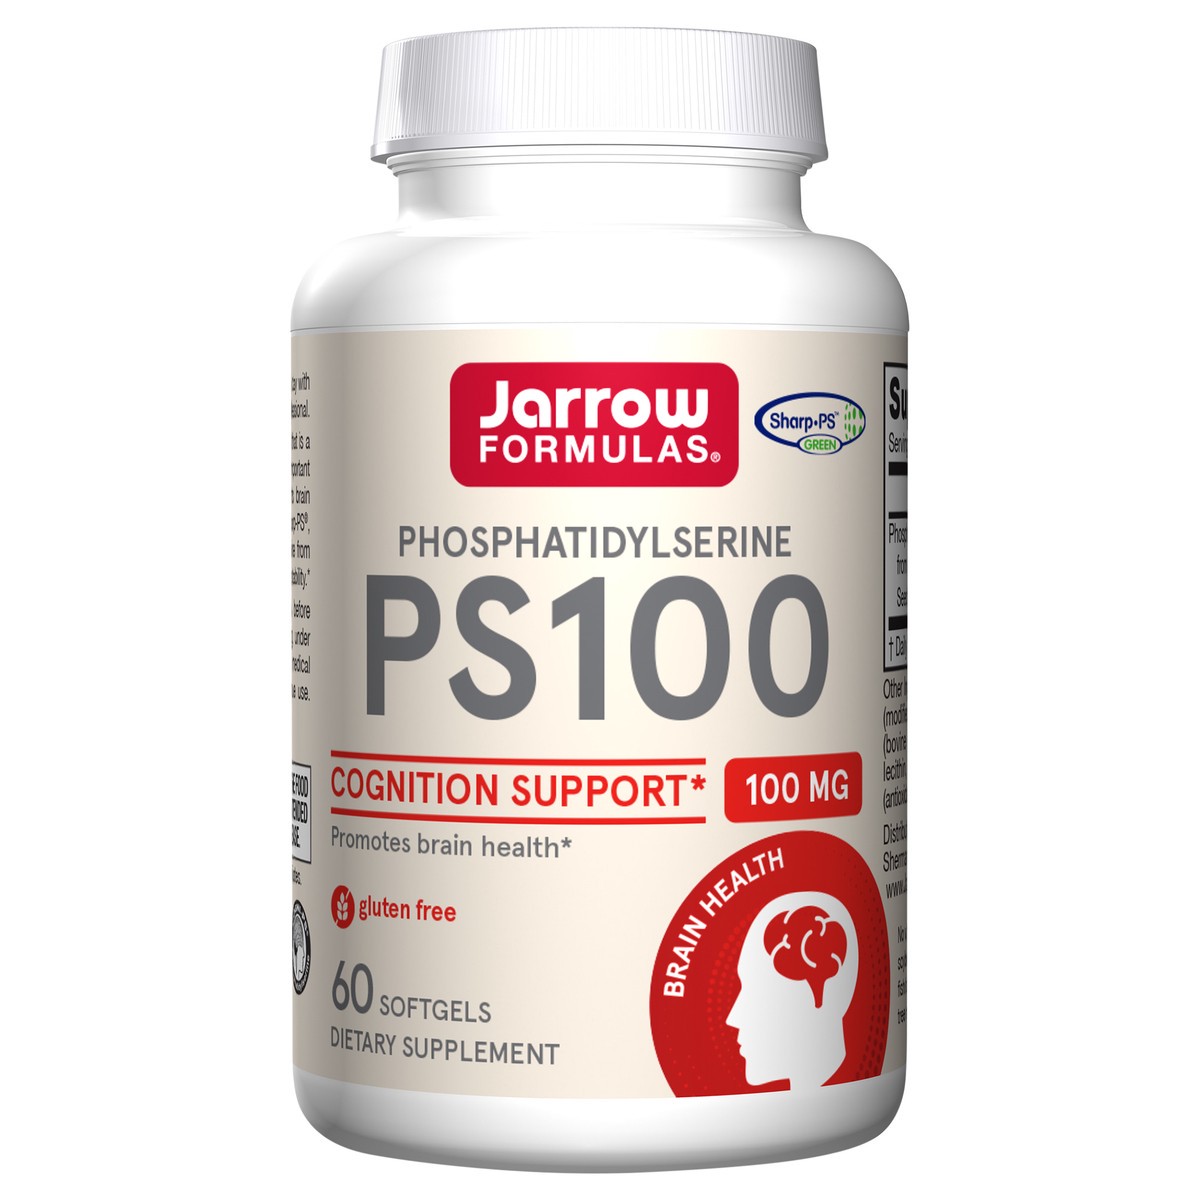 slide 1 of 4, Jarrow Formulas PS 100 - 60 Softgels - 100 mg Phosphatidylserine (PS) - Cognition Support - Dietary Supplement Promotes Brain Health - Soy Free - Up to 60 Servings, 60 ct